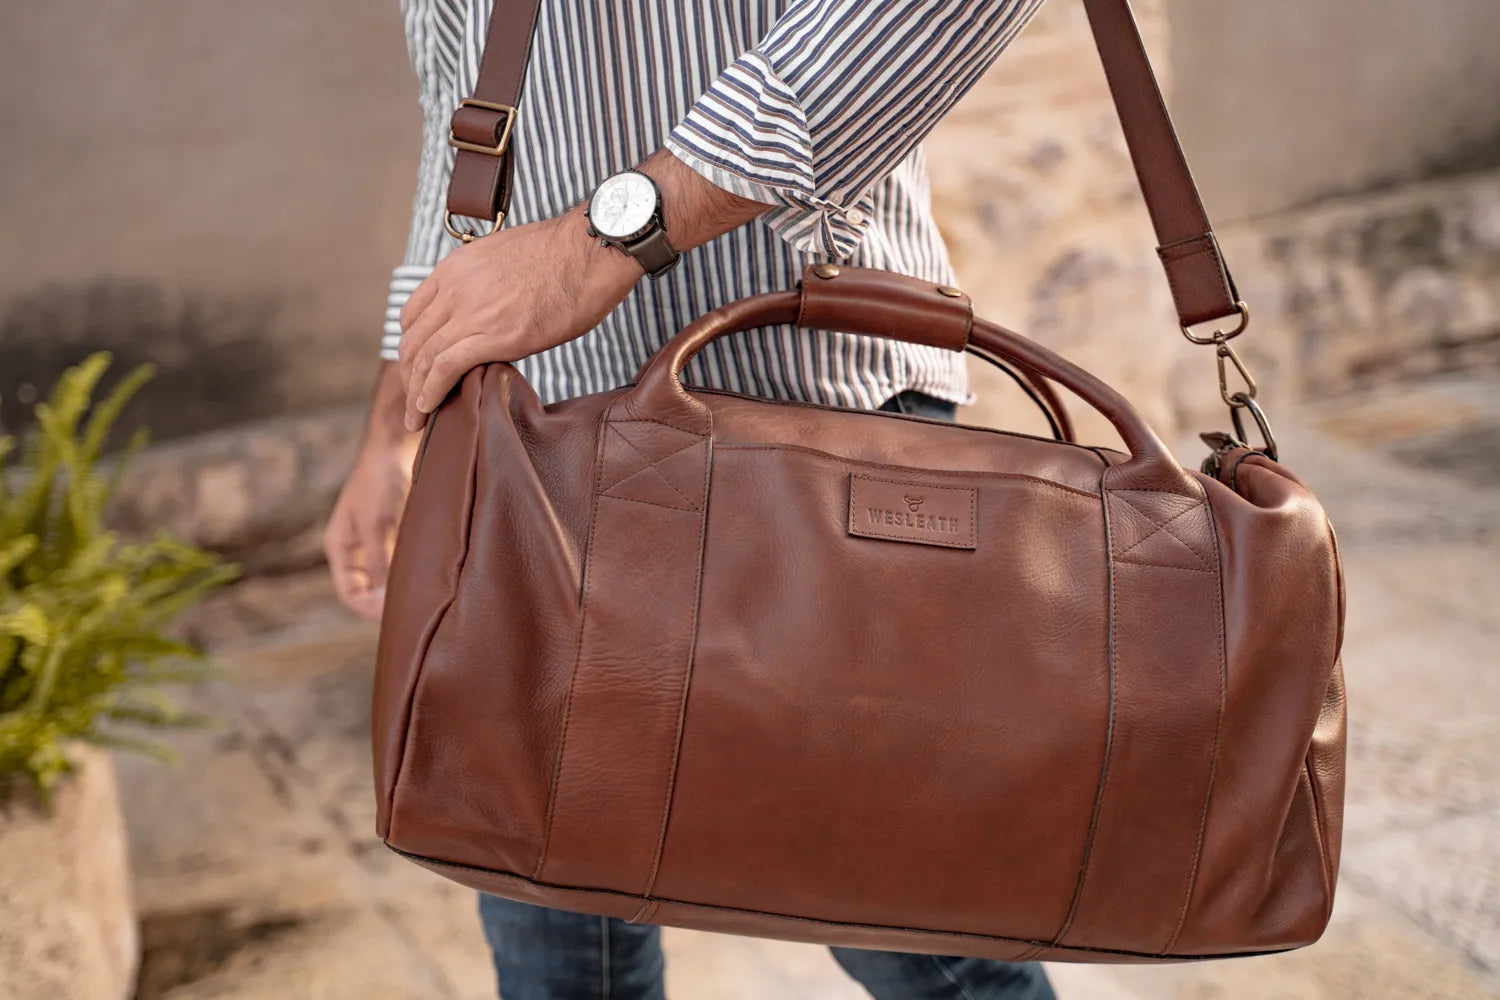 The bourbon duffle bag in the city